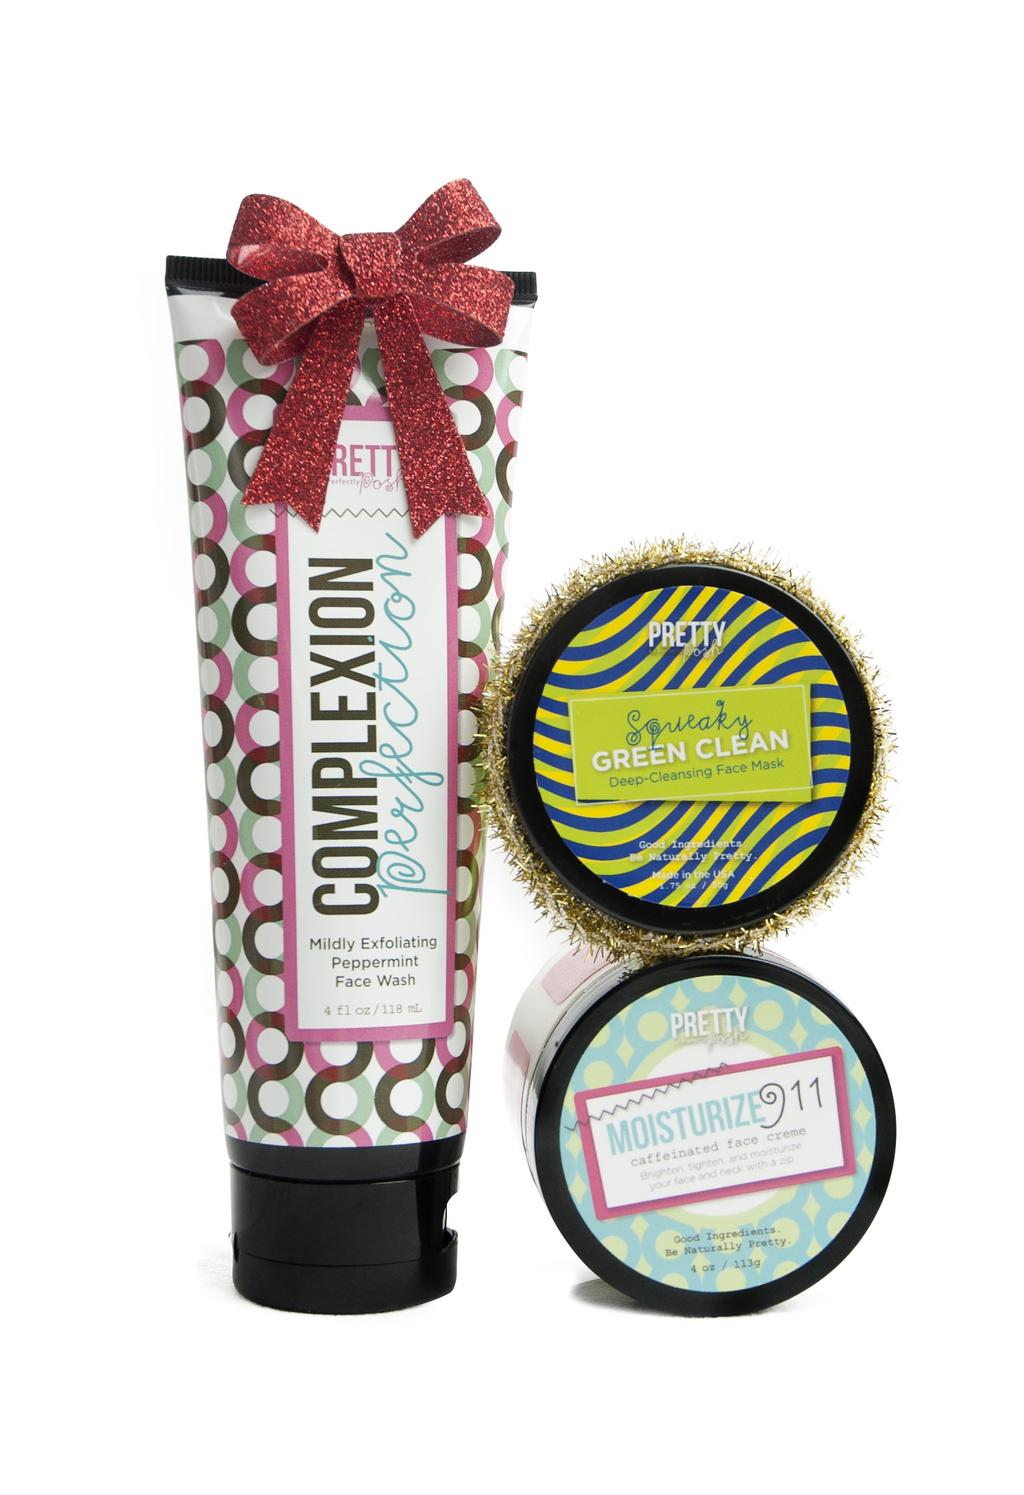 Pretty Face Bundle Pretty Faces love to be pampered. It s a pretty great gift! Naturally wash with essential oils Keep pores Squeaky Clean Moisturize, tighten & brighten Get the set.